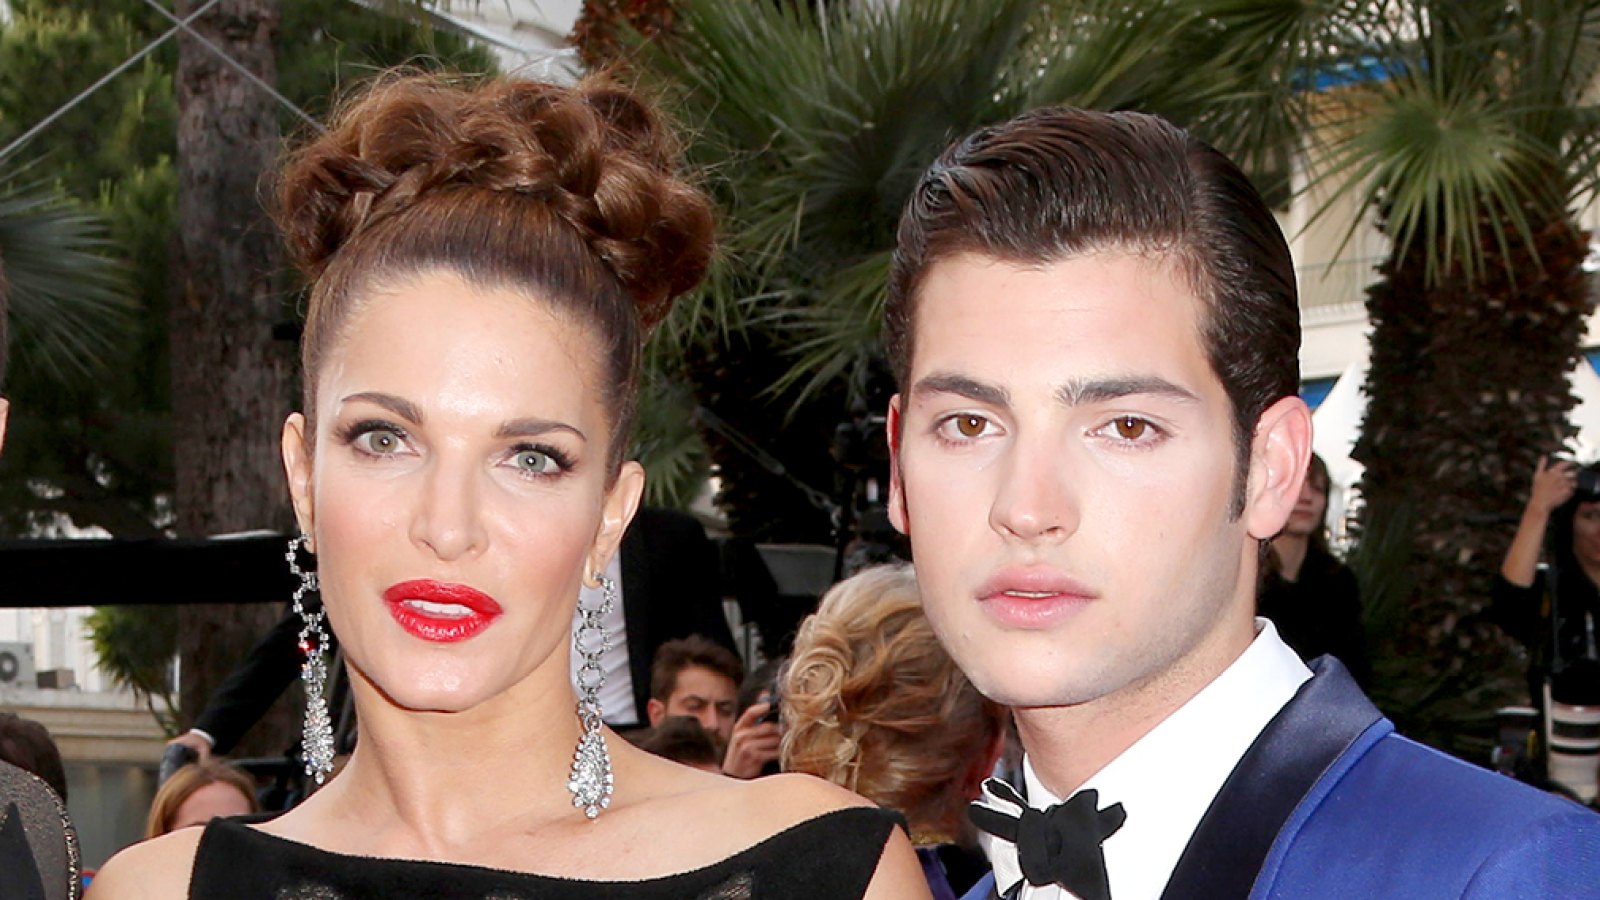 Stephanie Seymour and Peter Brant Jr attend 'The Homesman' Gala film premiere, 67th Cannes Film Festival, France in 2014.